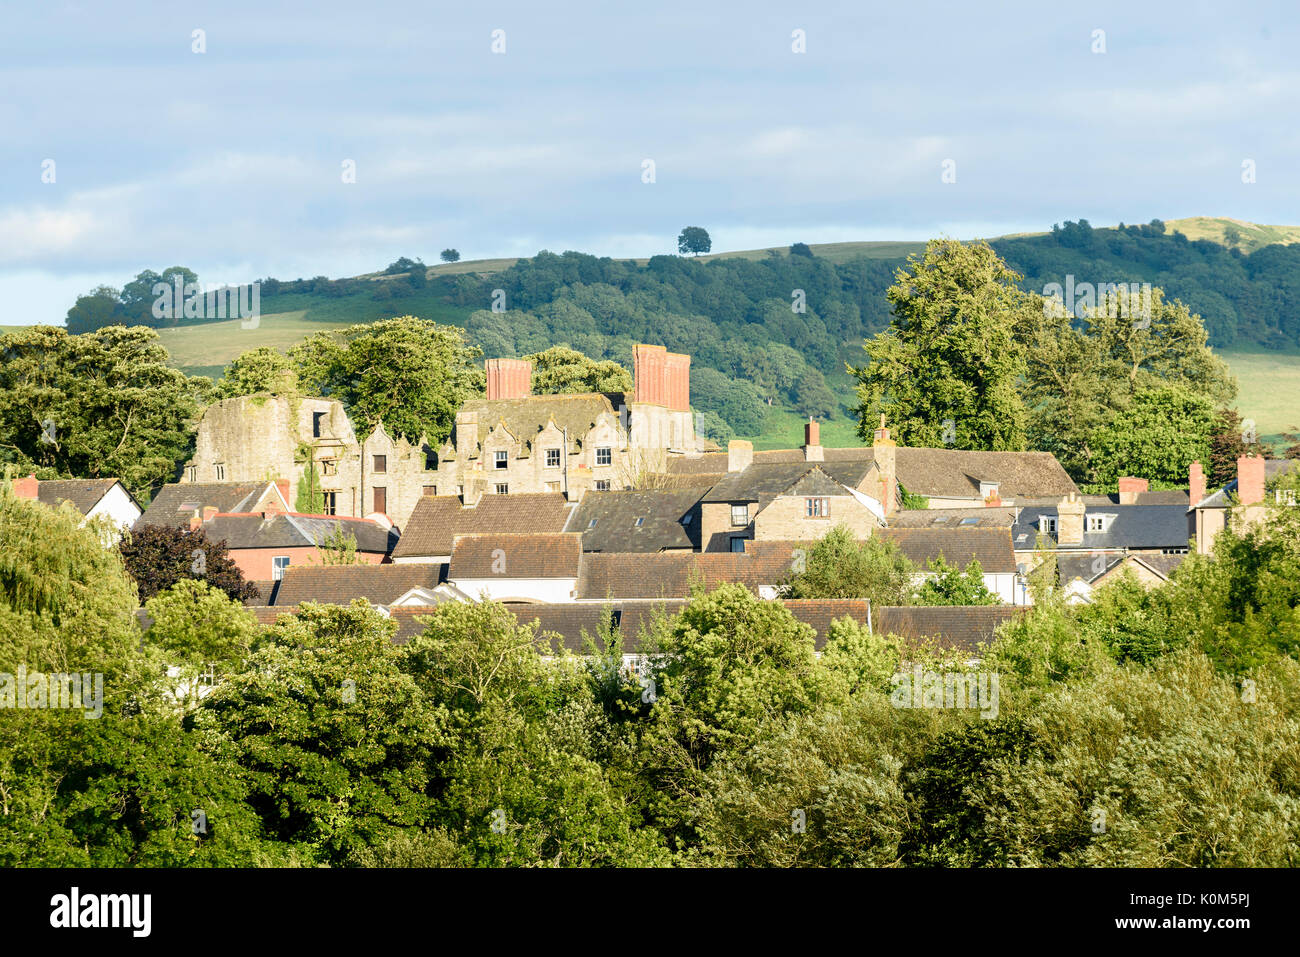 Abandoned castle and houses at Hay on Wye, a small town on the border of England and Wales. Stock Photo